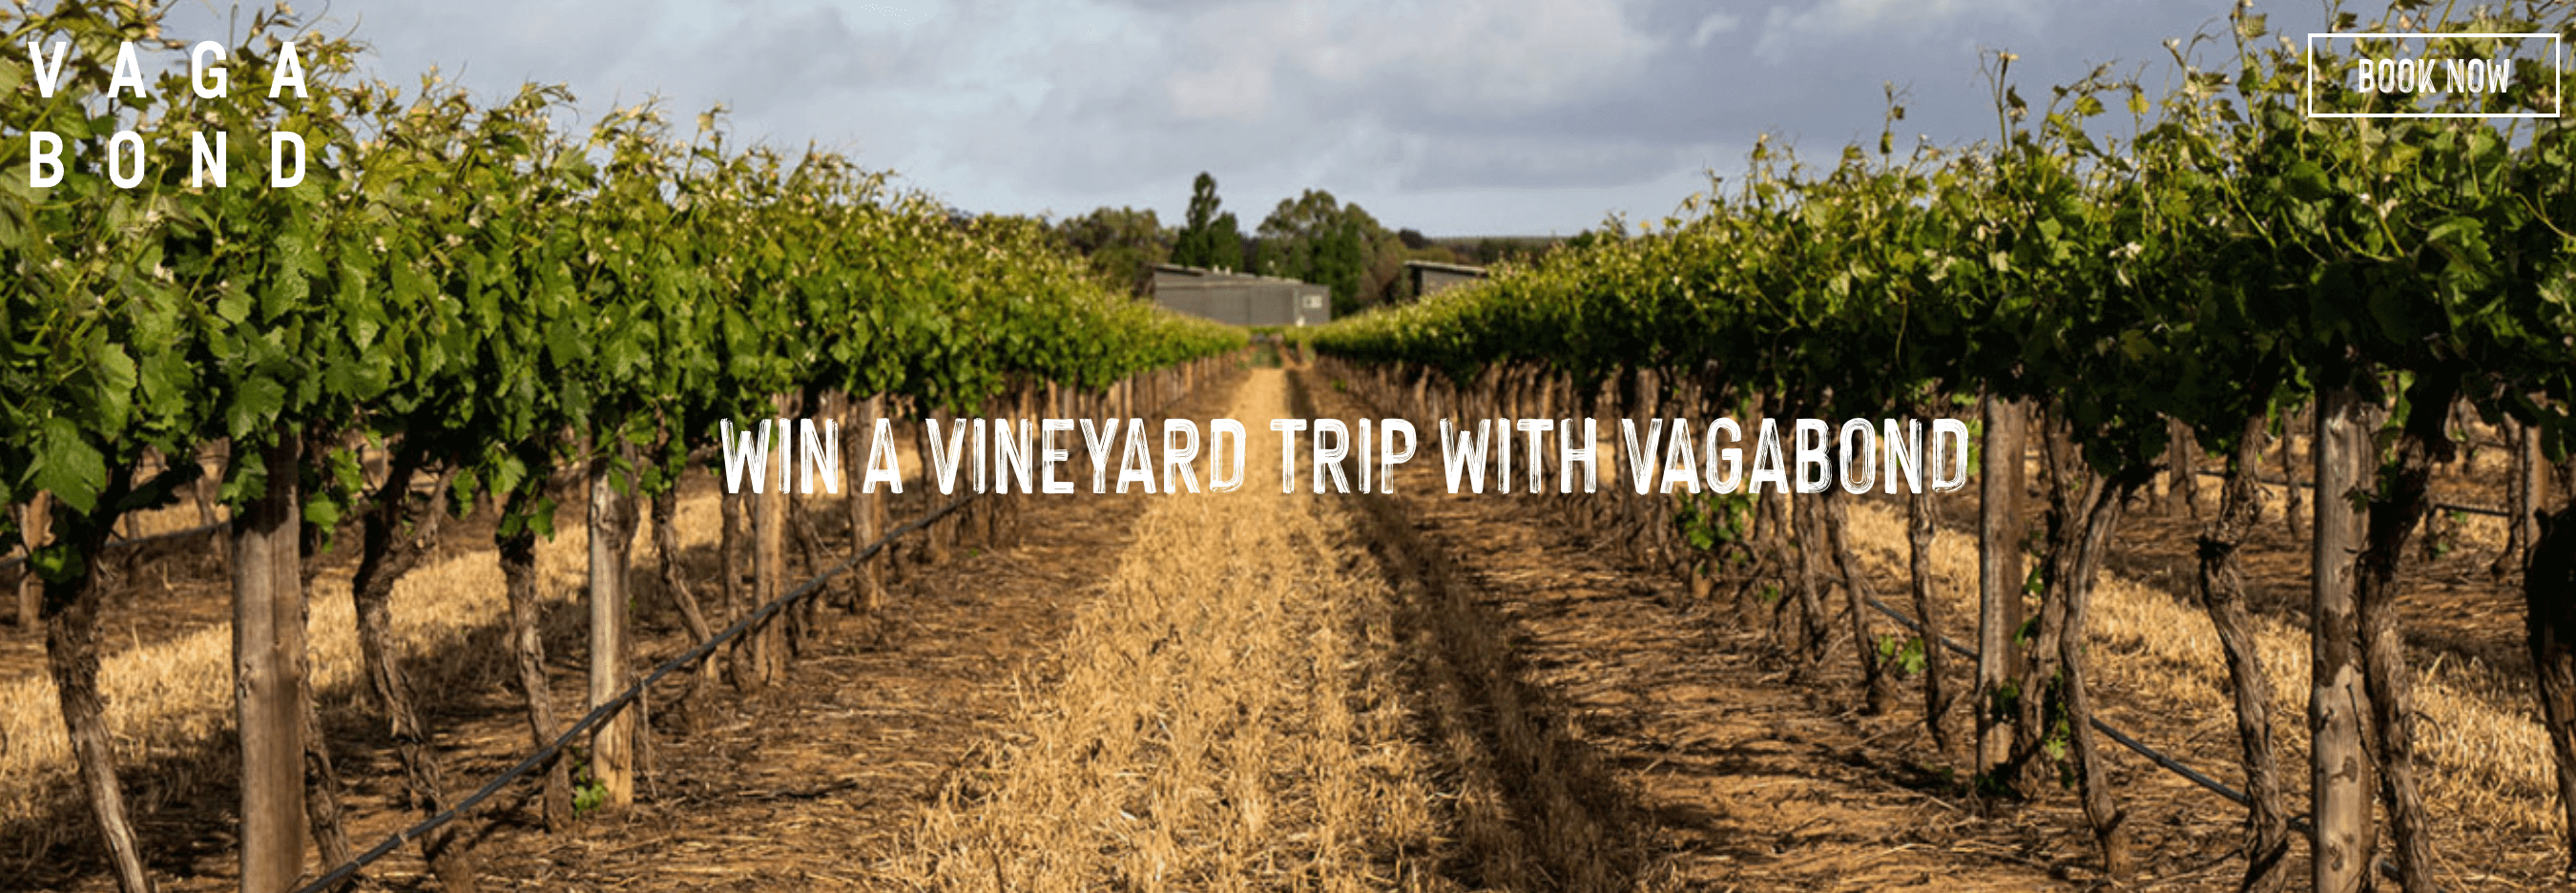 Vagabond is celebrating the opening of their Gatwick bar with this competition and is giving away the chance to win a weekend trip for you and a friend to a vineyard in Europe!